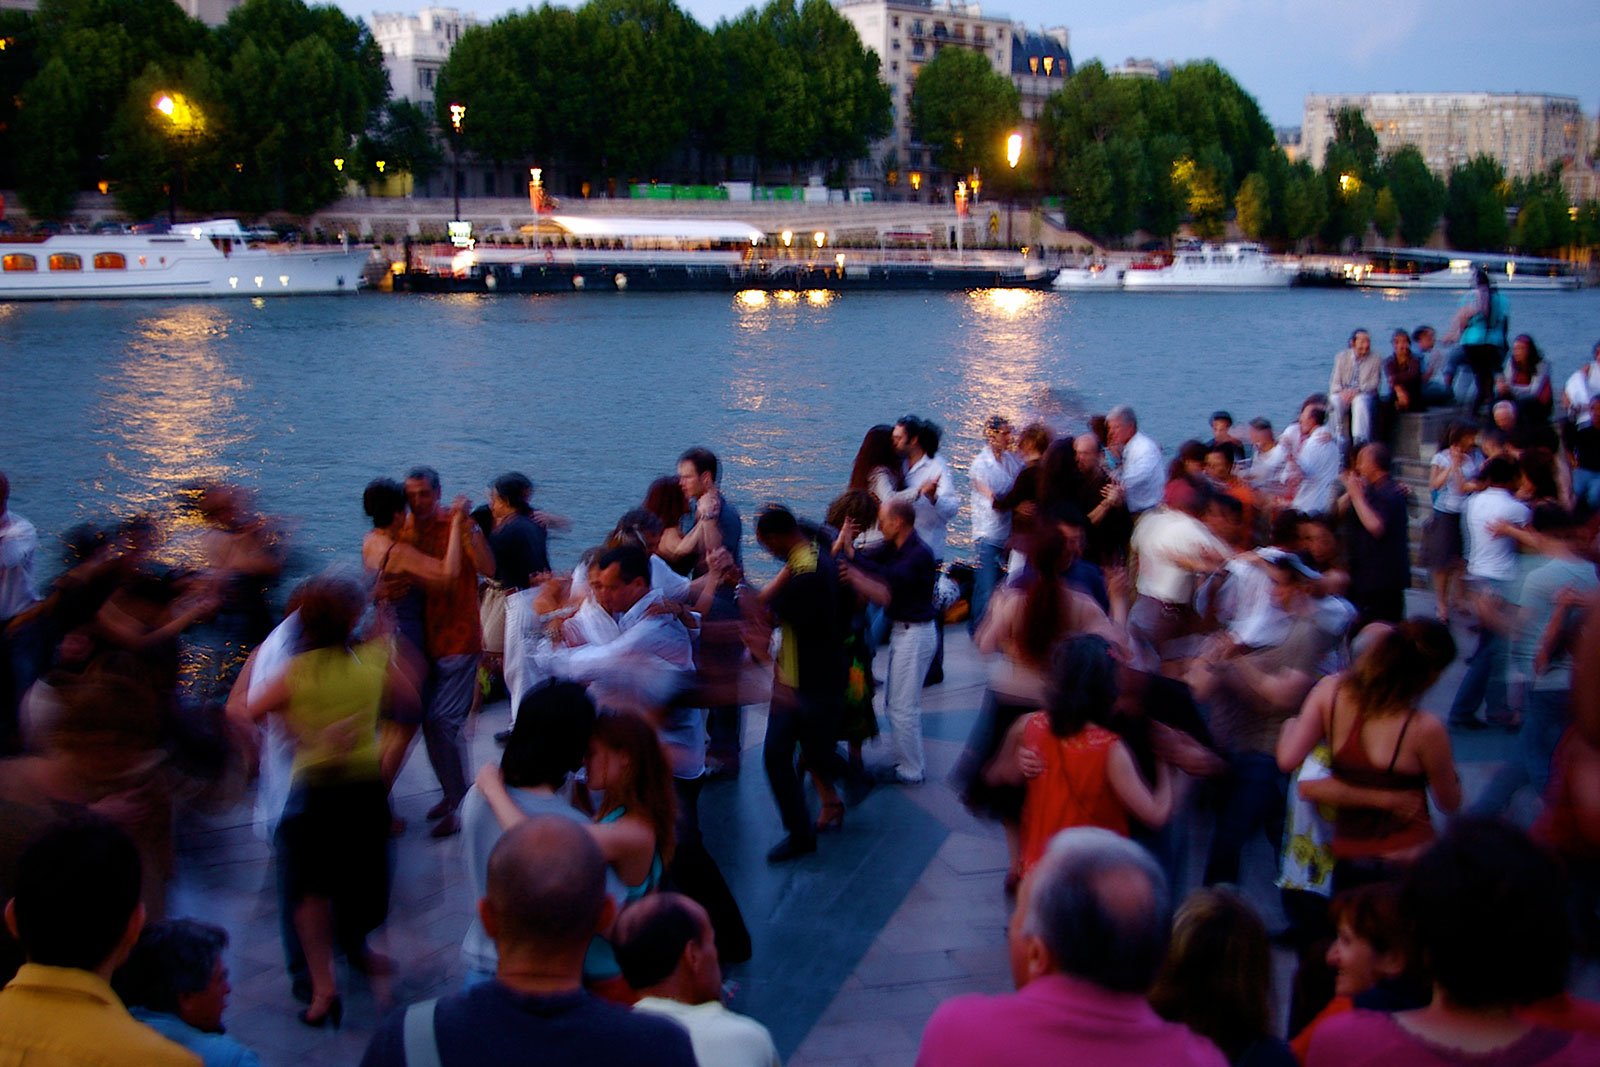 How to dance tango on the bank of the Seine in Paris